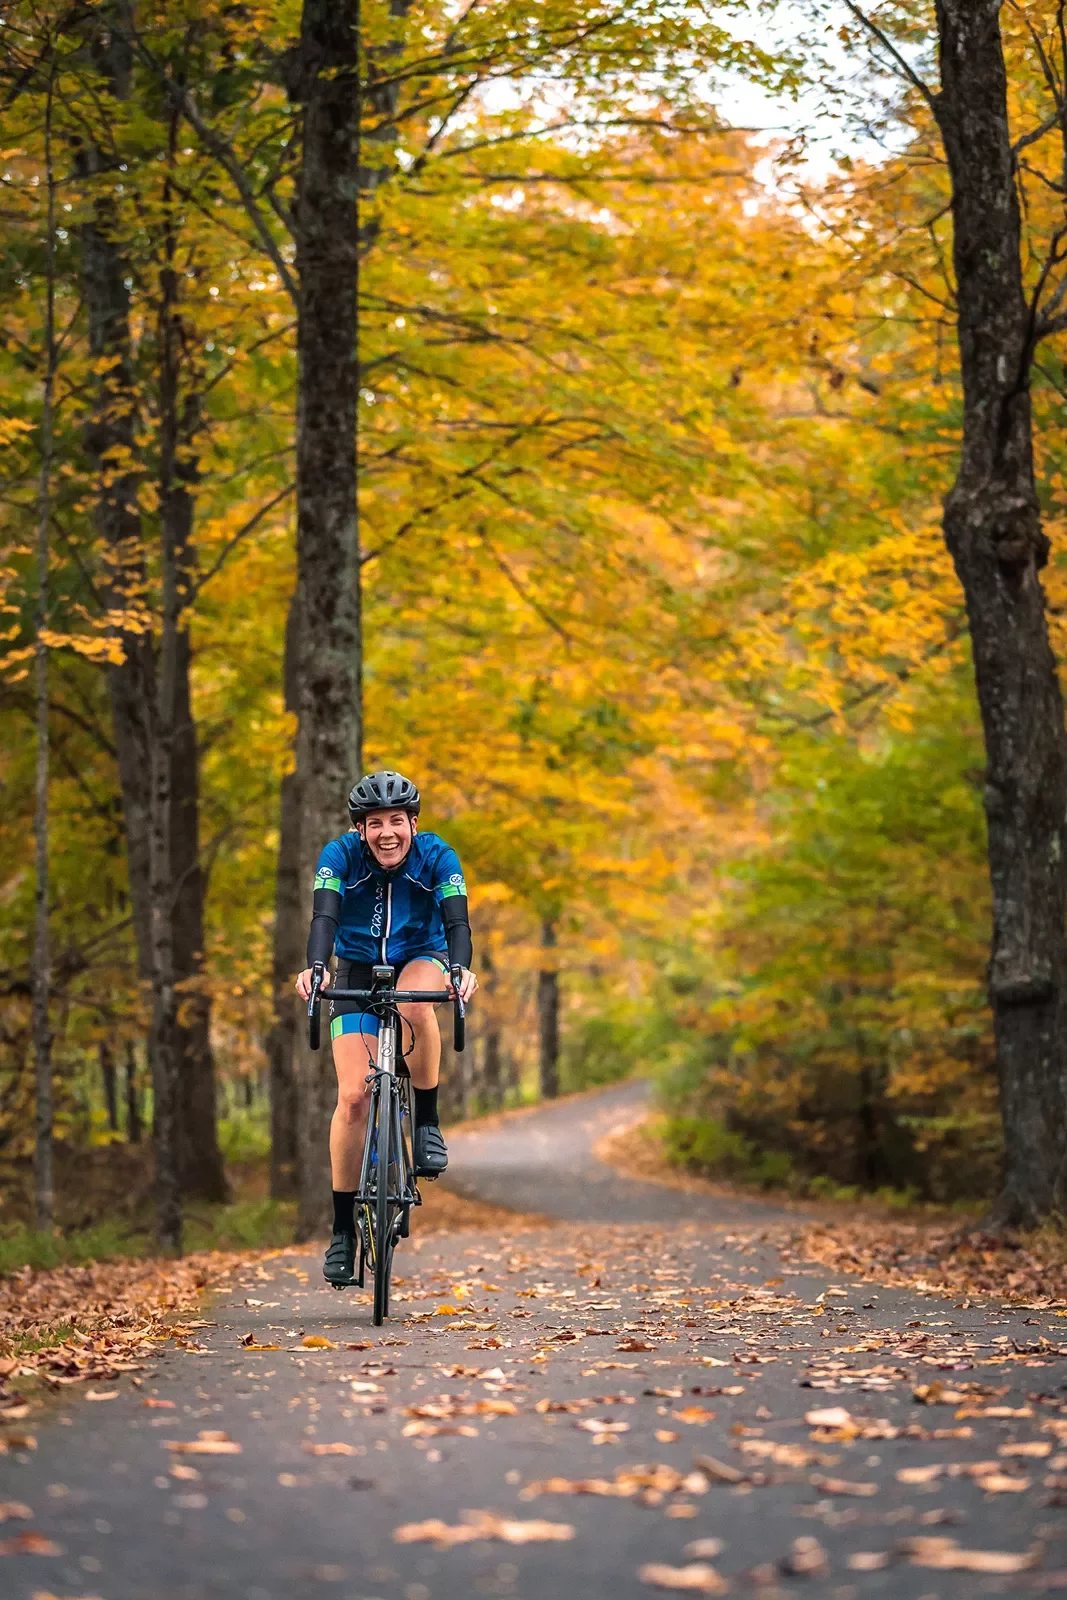 Guest cycling down autumnal road, smiling at camera.